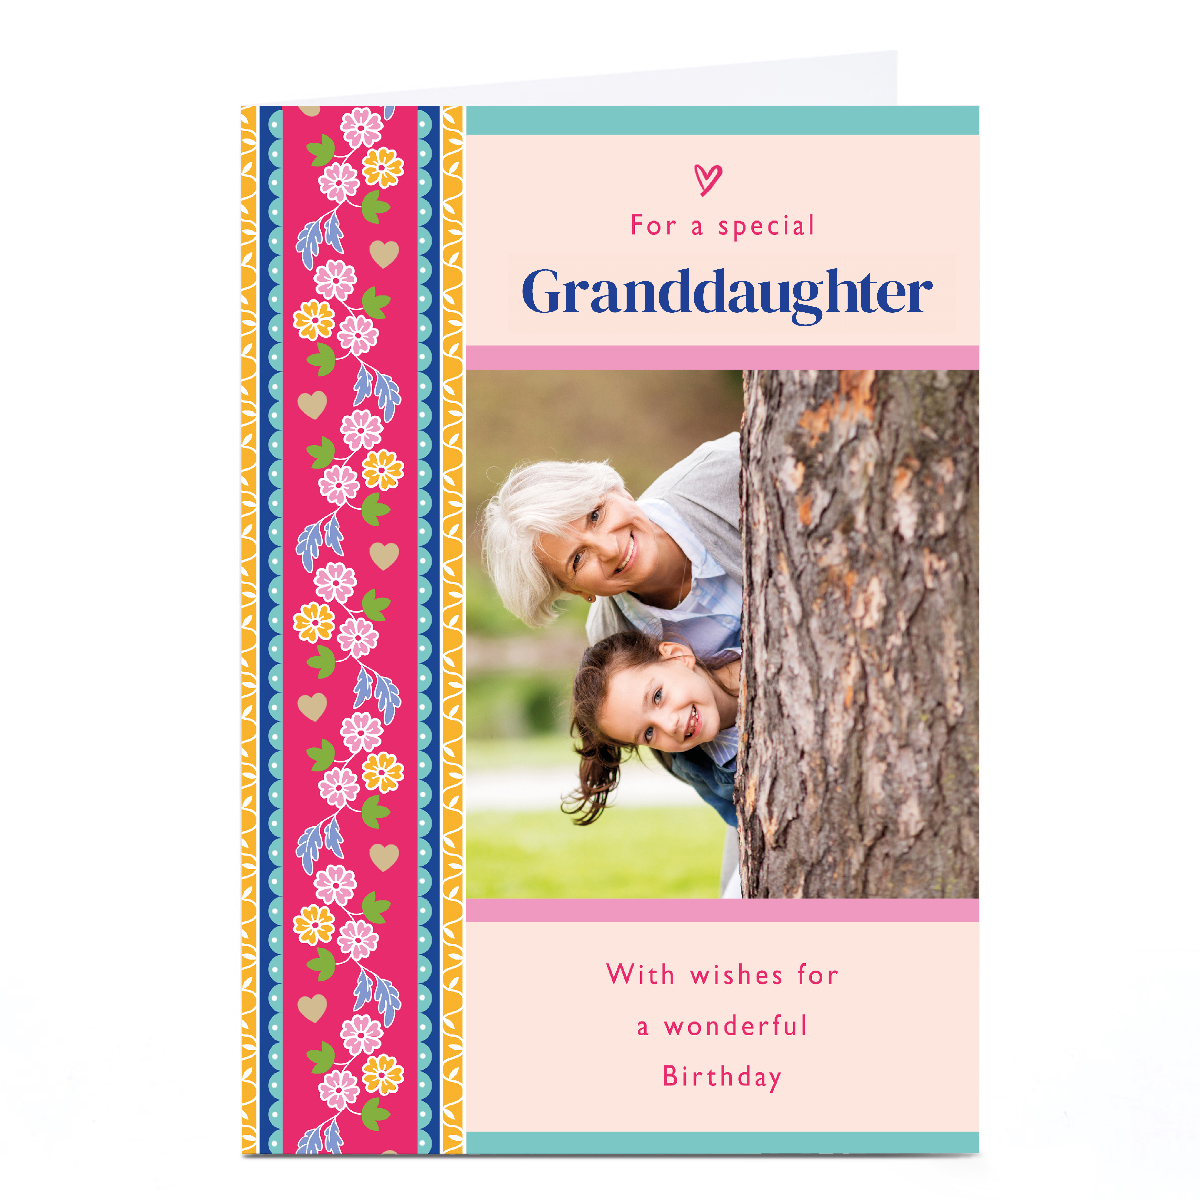 Personalised Birthday Card - For a special Granddaughter